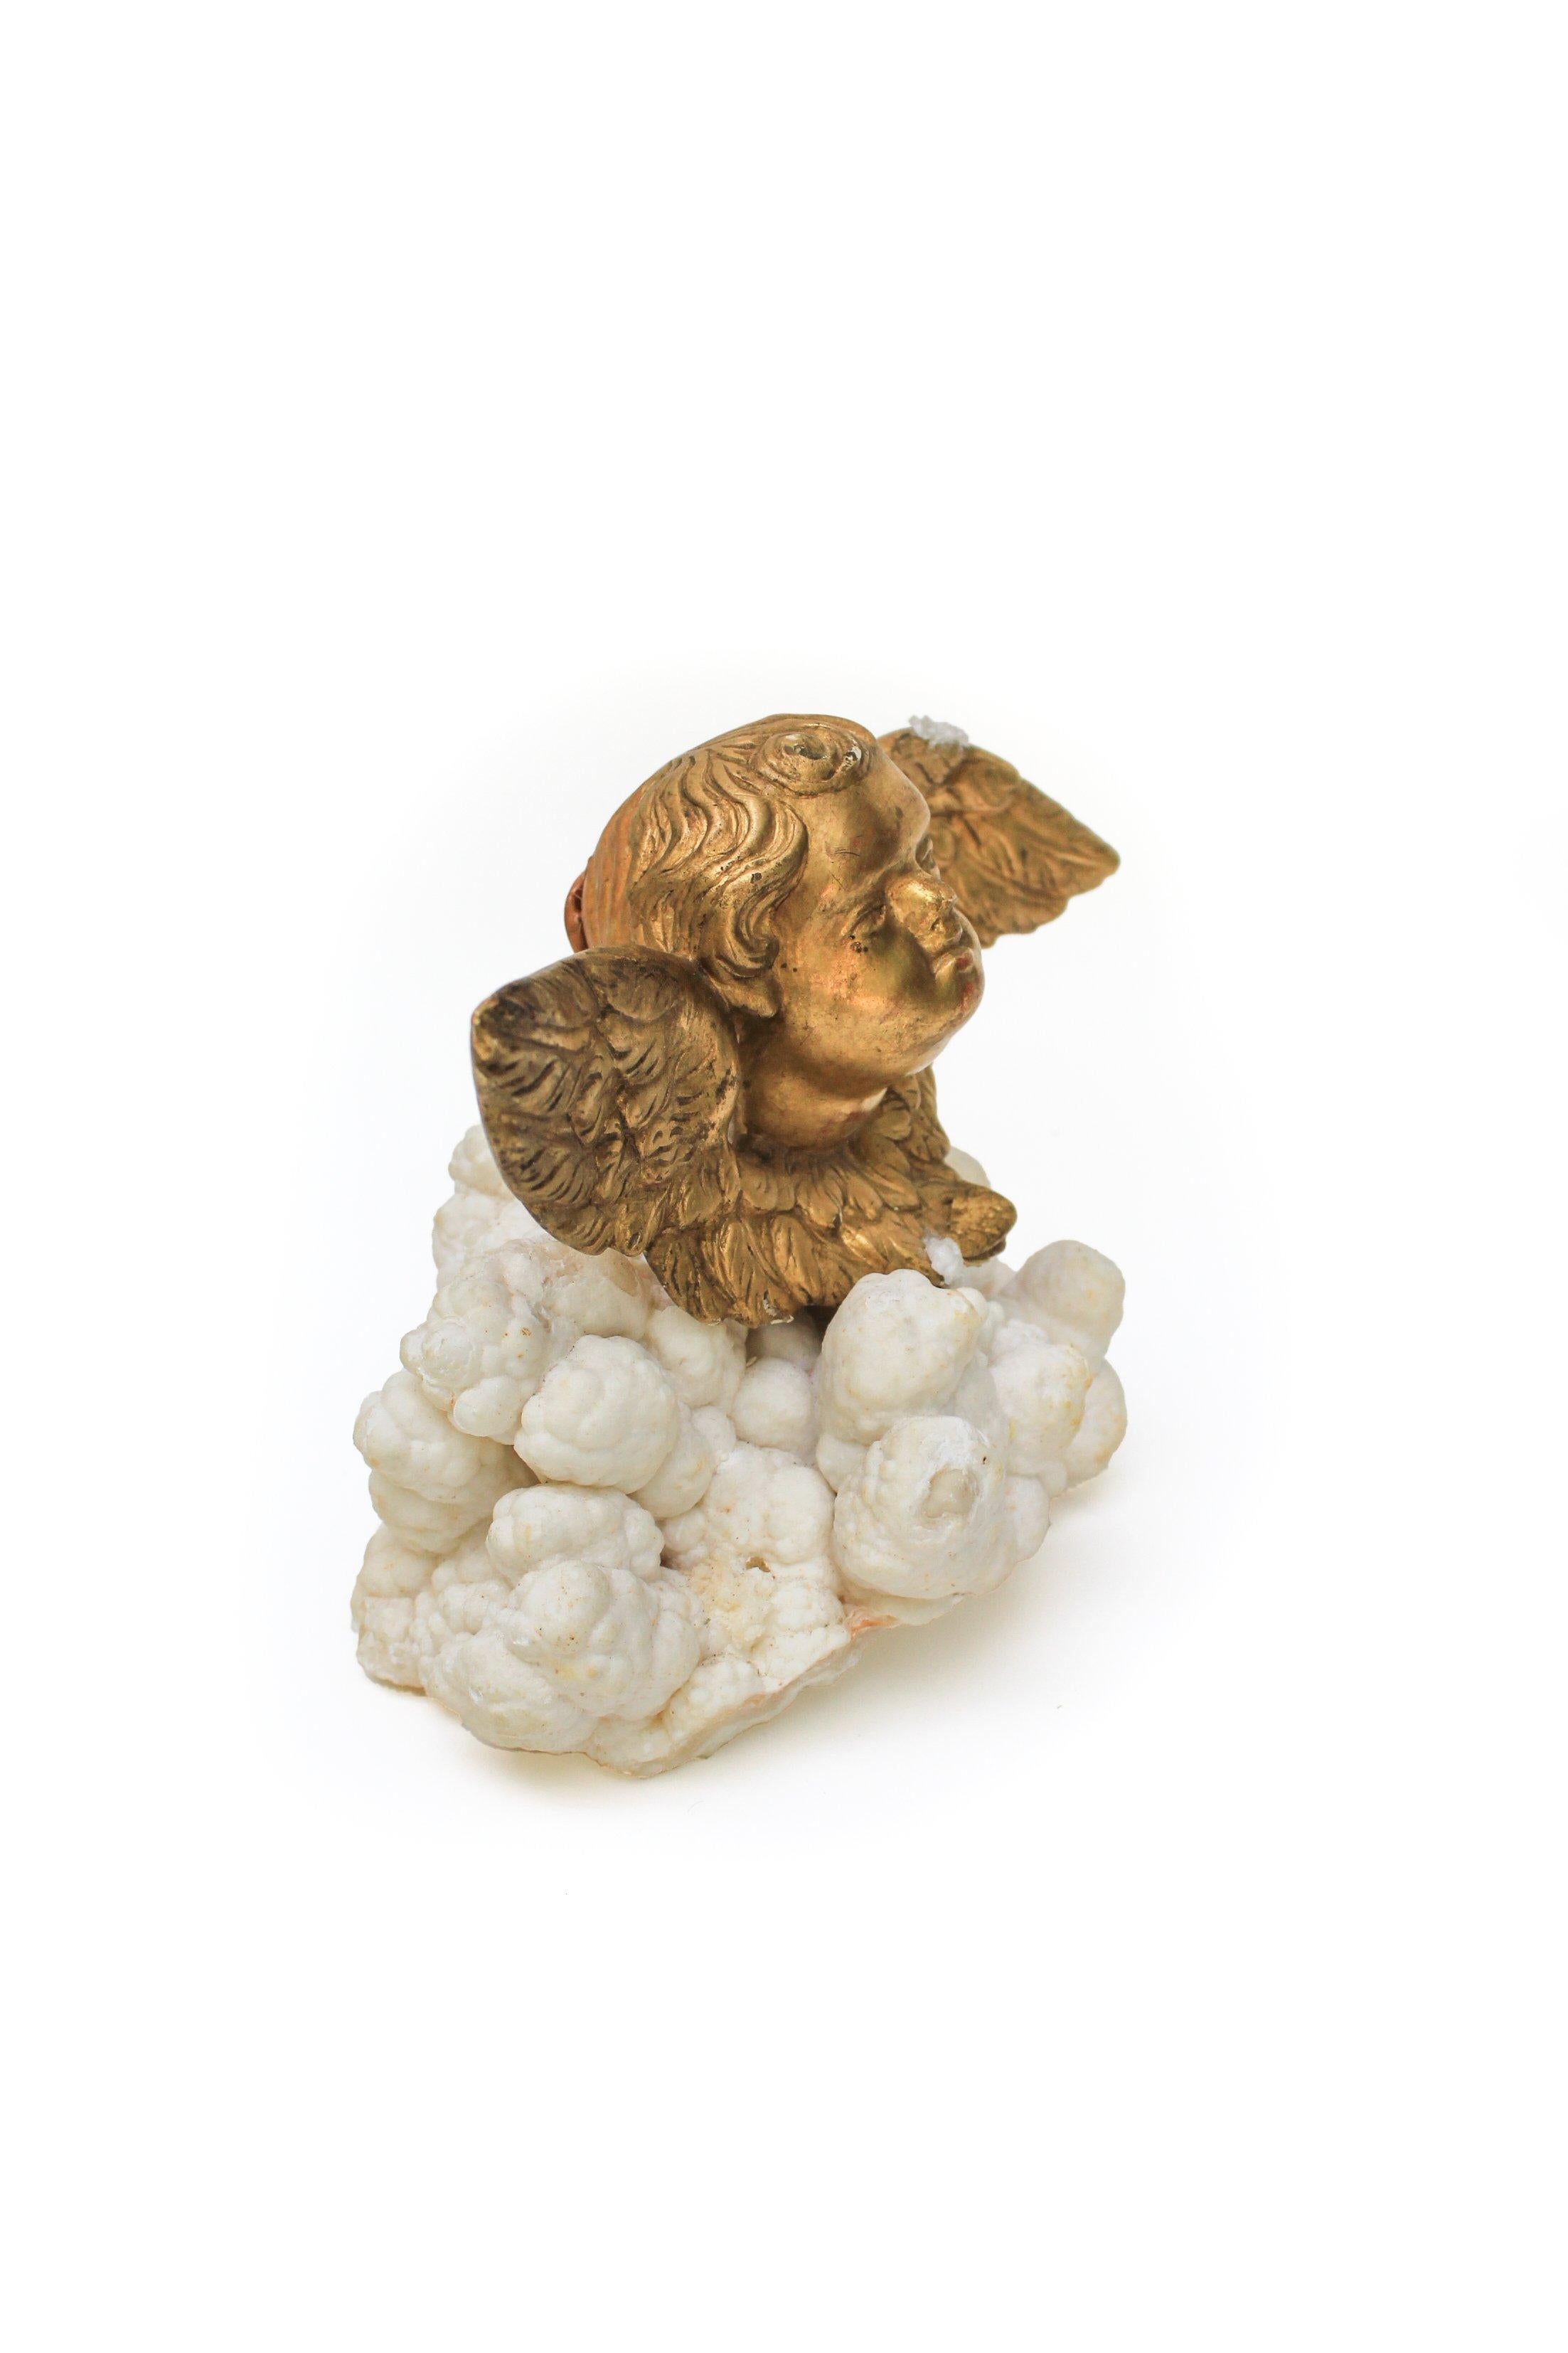 Rococo 18th Century Italian Gold Leaf Angel 'Putto' Mounted on Aragonite